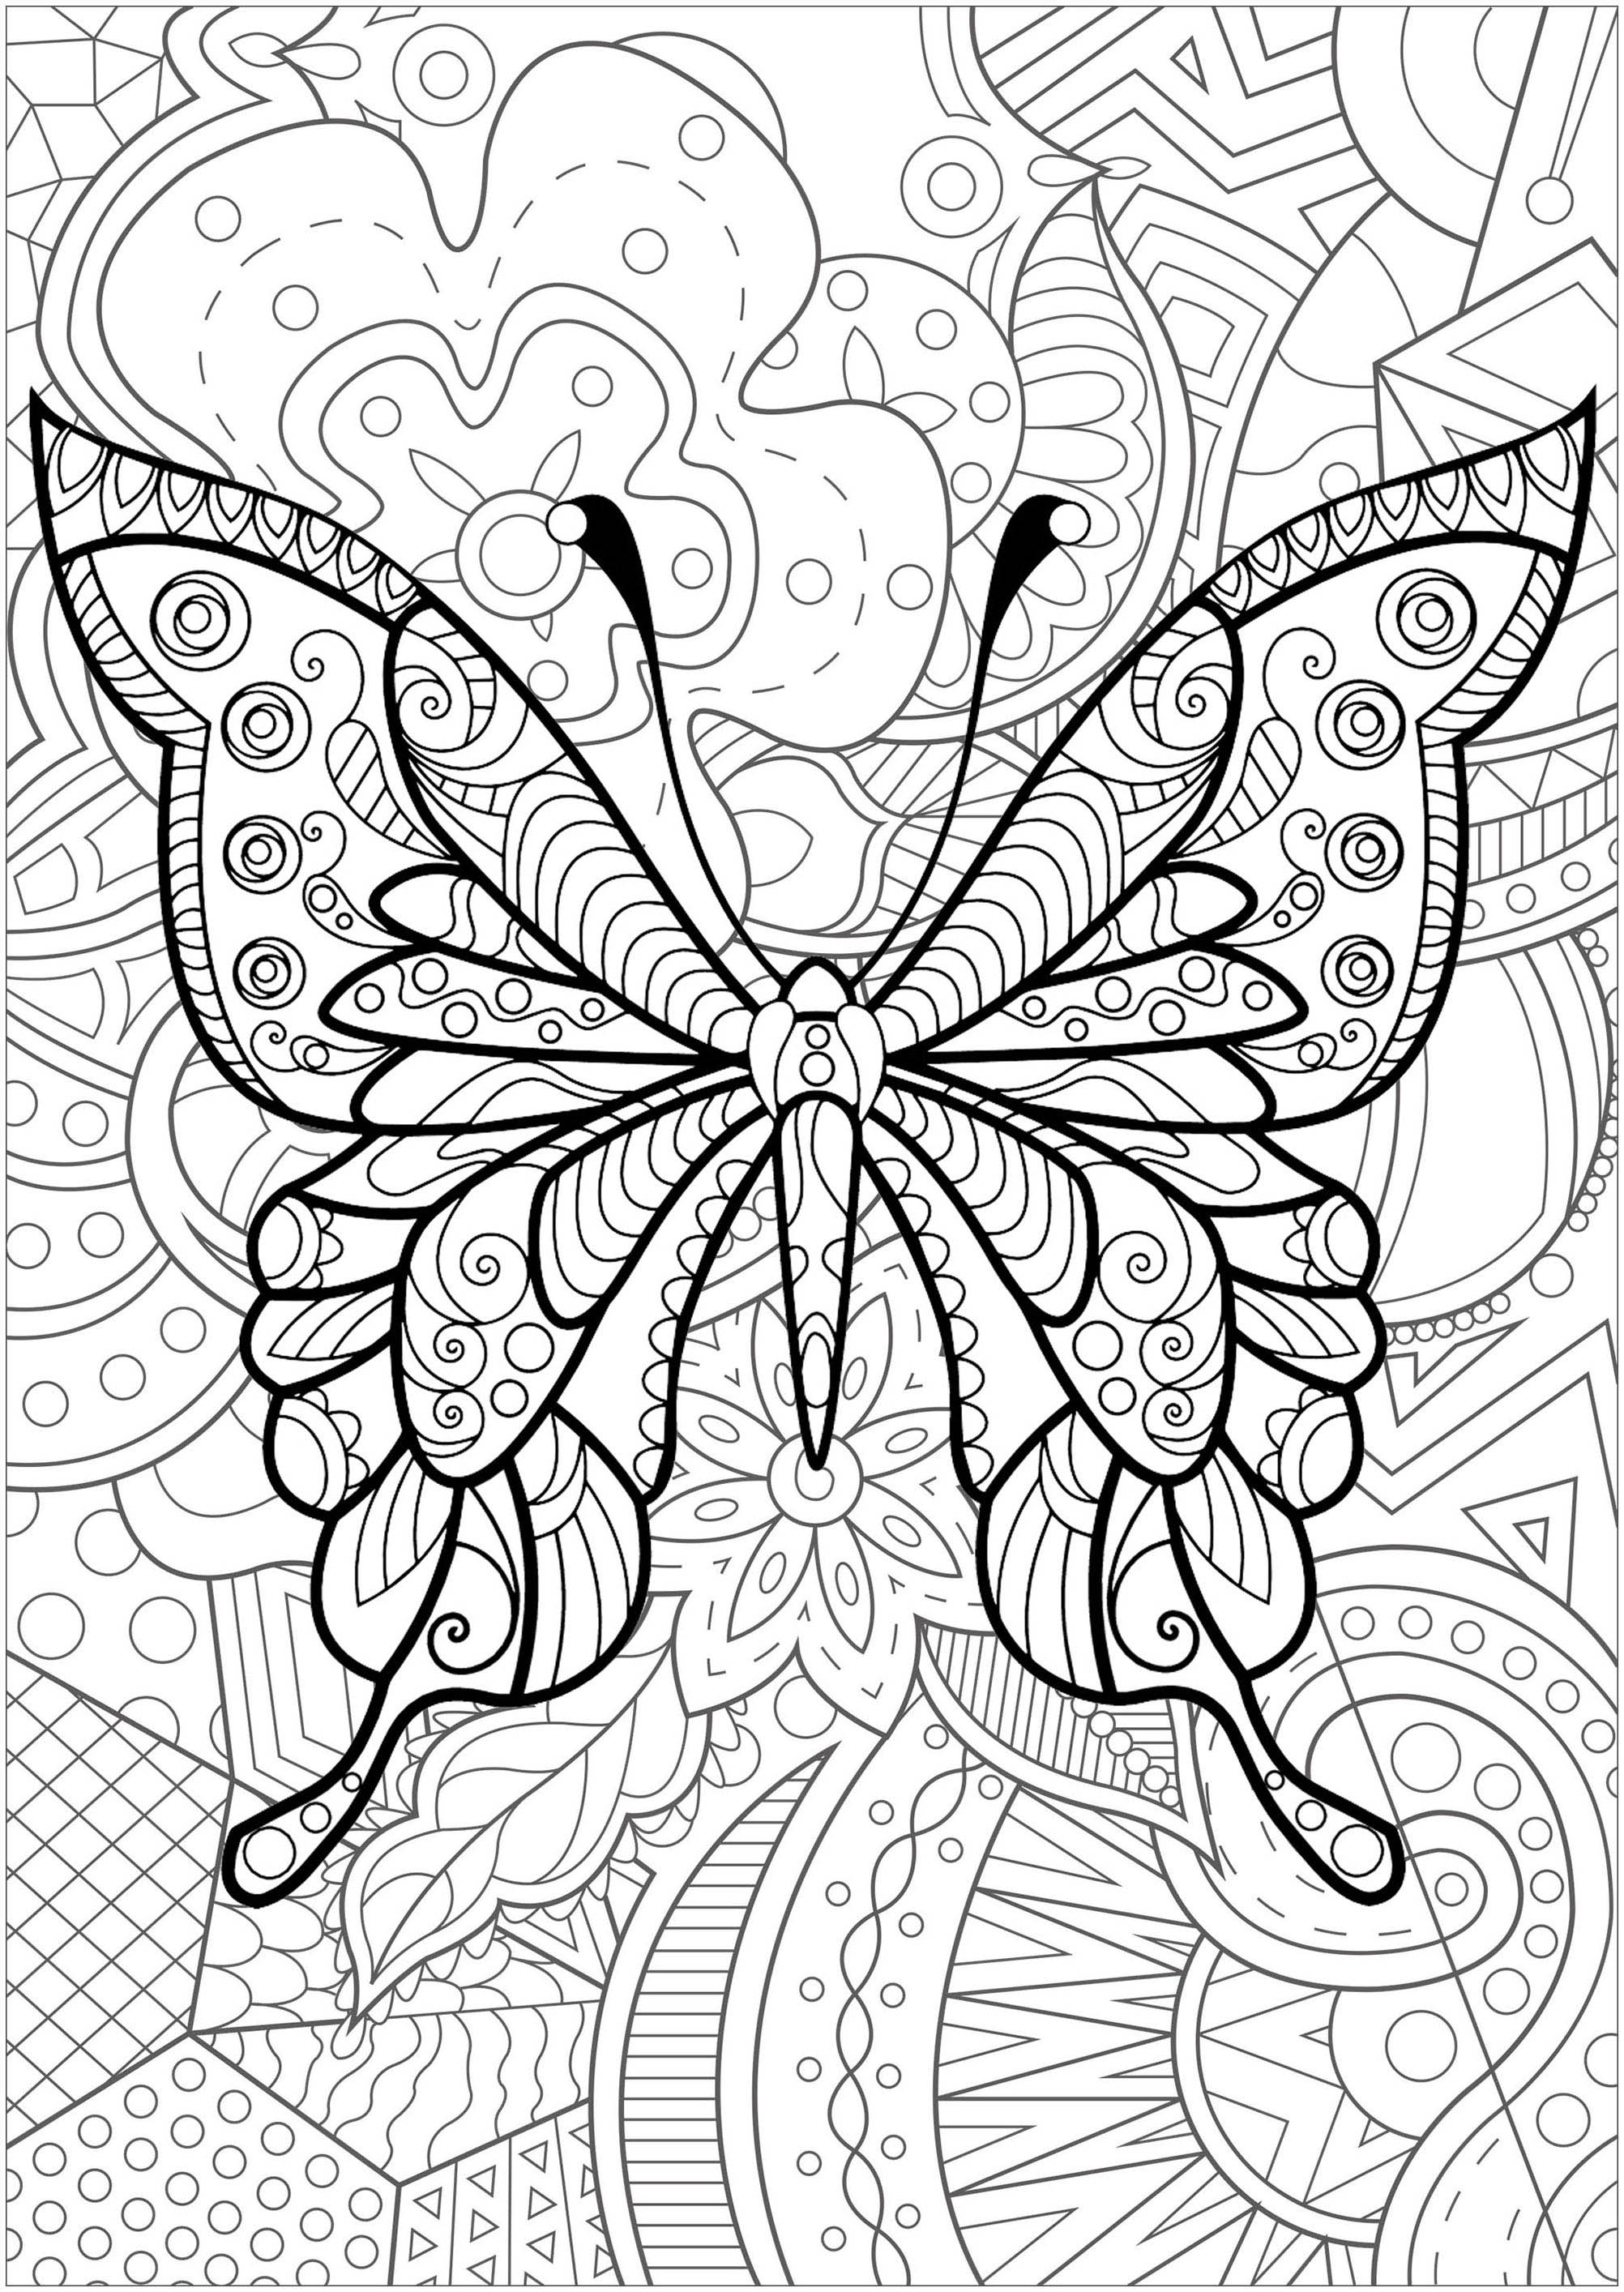 Butterfly with patterns inside and magnificent flowered background - 4, Artist : Art. Isabelle